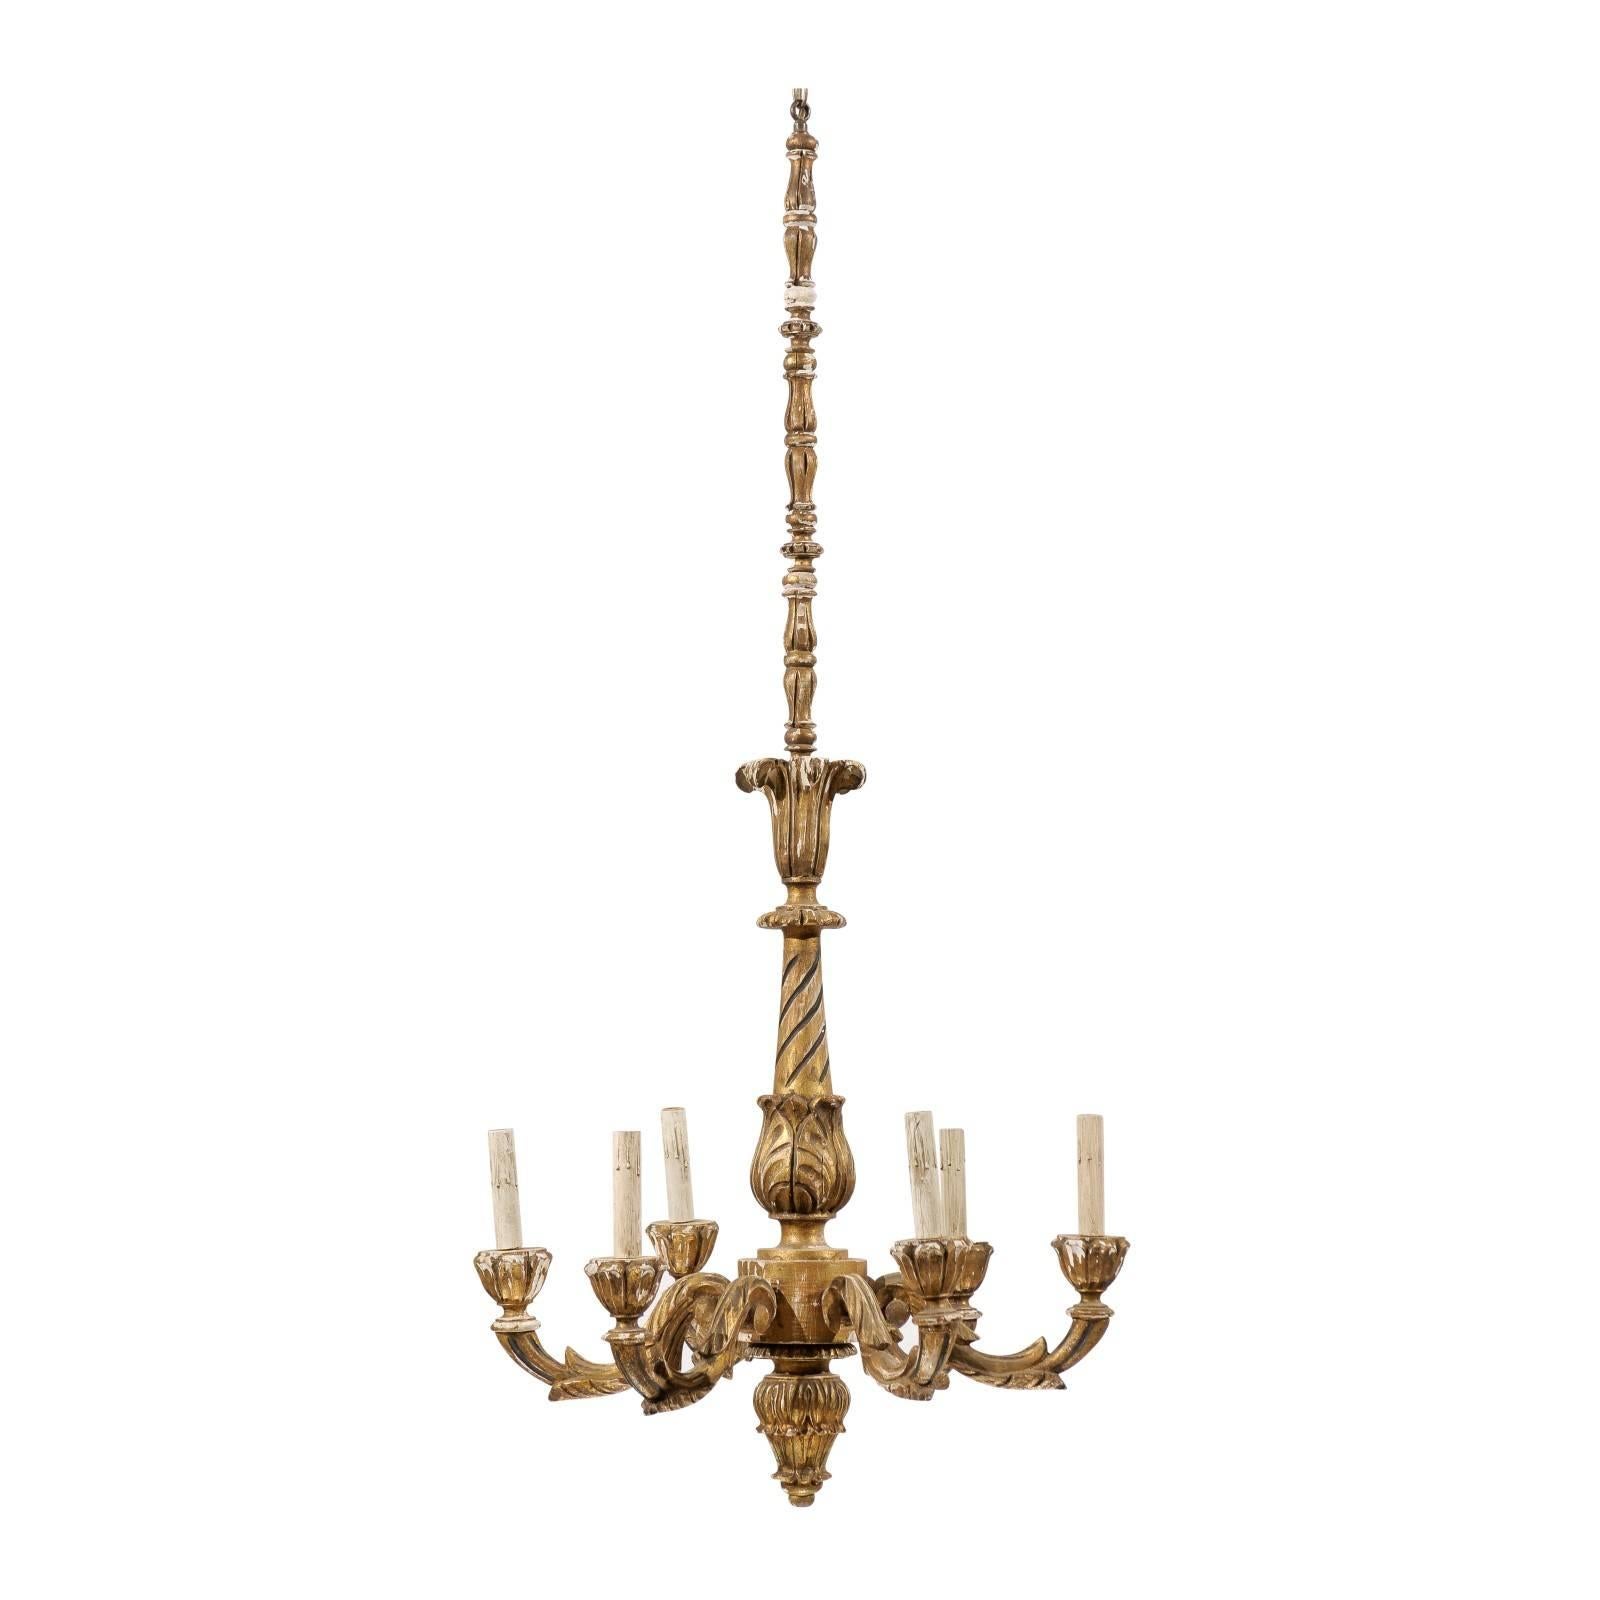 A tall and slender French six-light giltwood chandelier with ornate decoration and beautiful aging. This piece is adorned with rich acanthus leaf carvings. The carvings are accented in a darker color in chosen spots to enhance the depth and overall